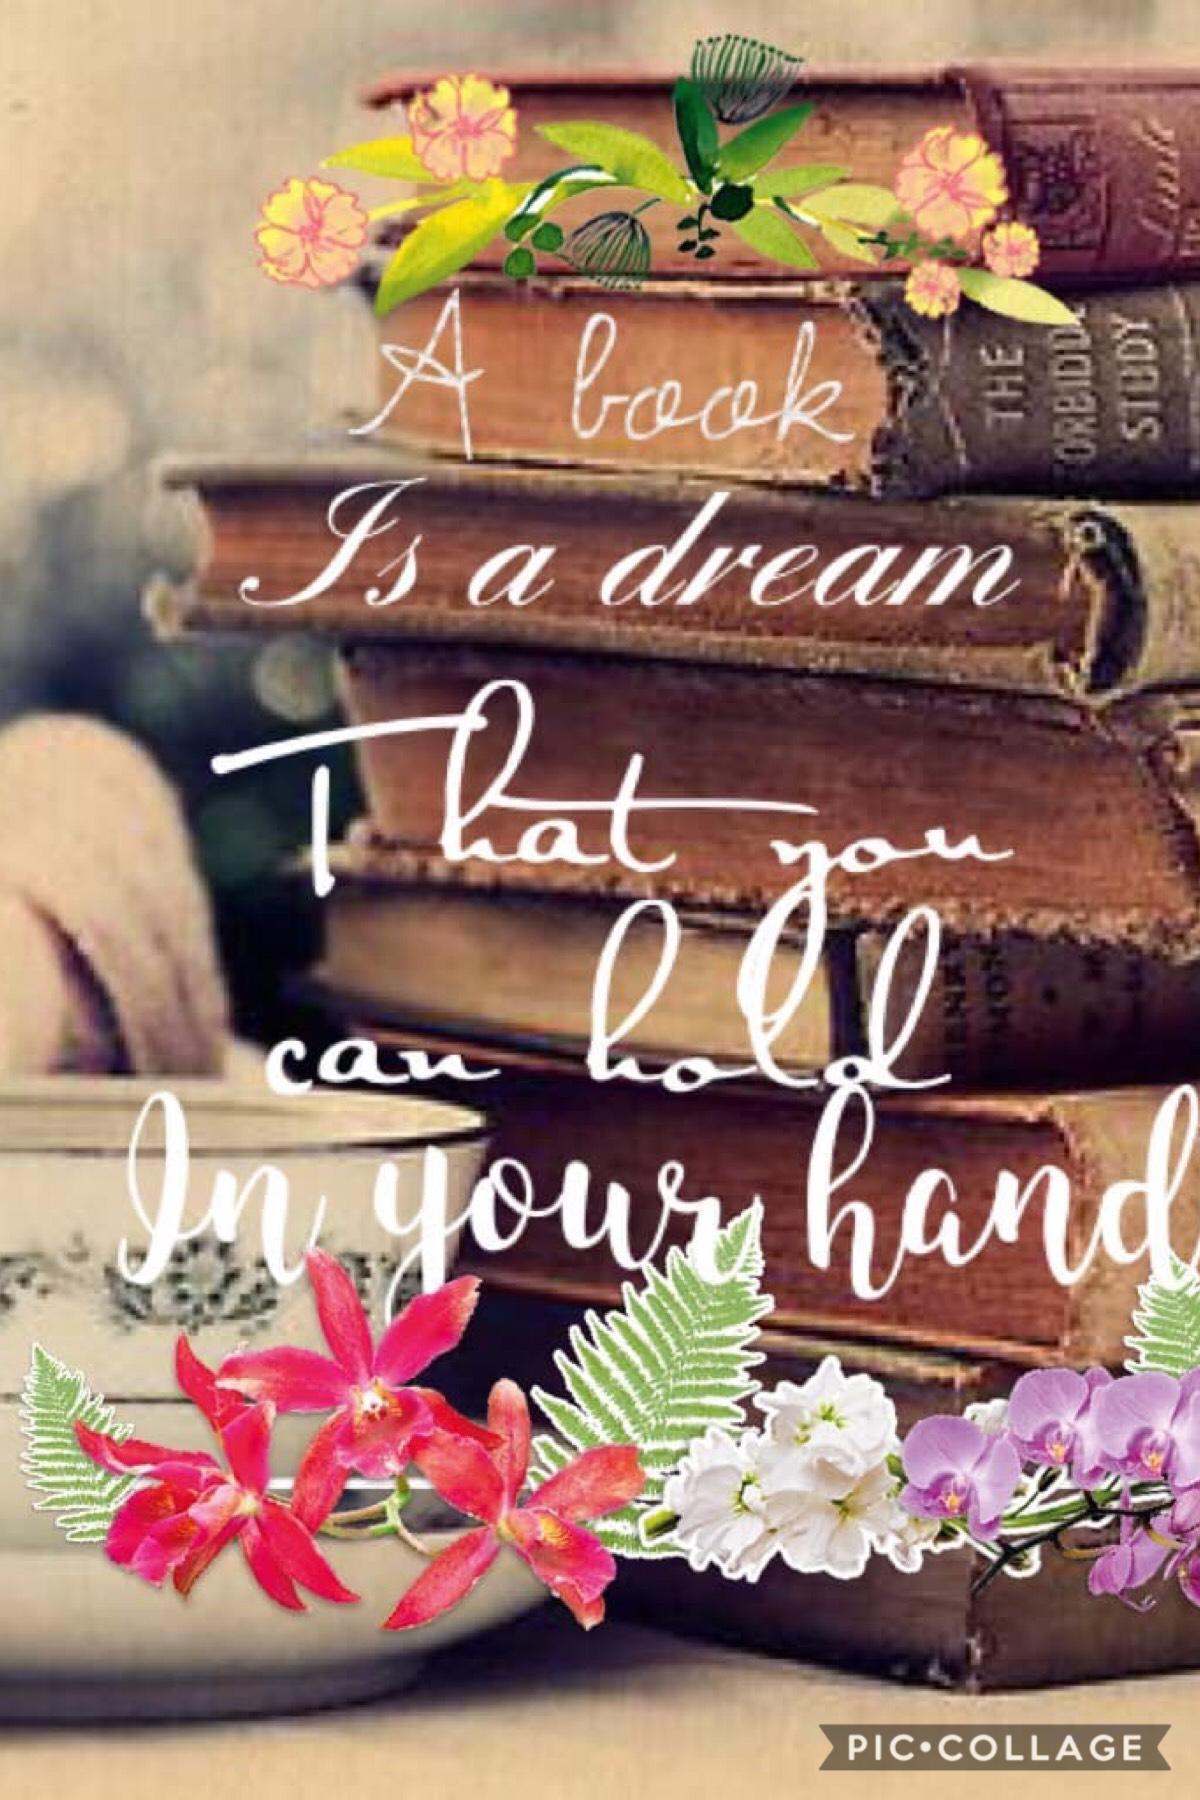 Books and dreams are the best